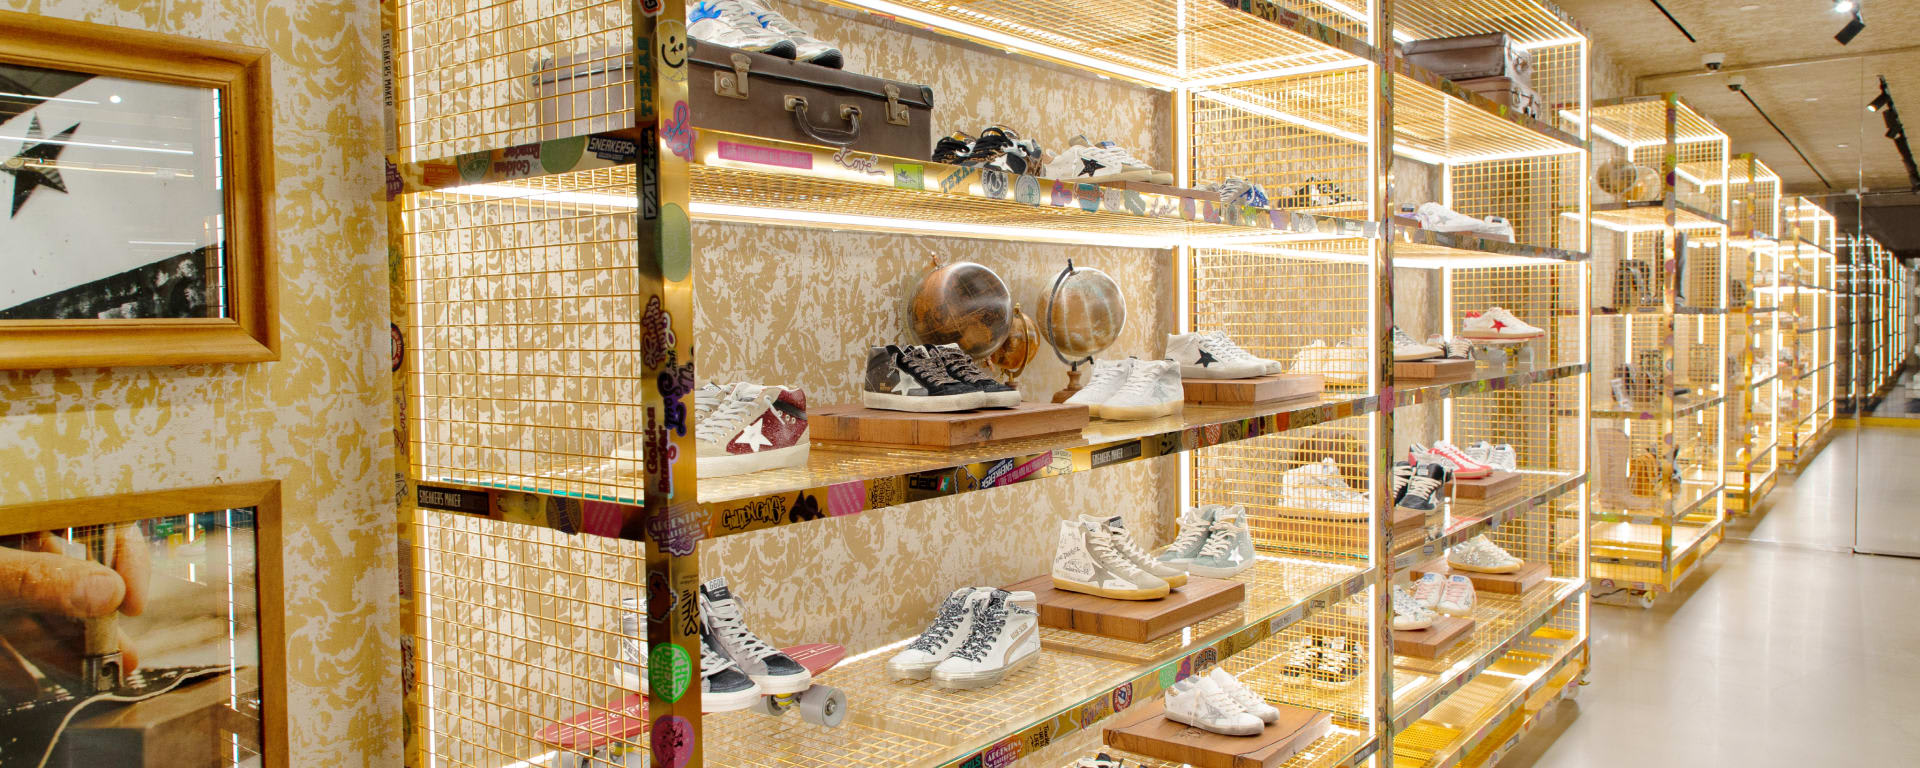 Golden Goose ST. LOUIS FLAGSHIP STORE 3 of 3